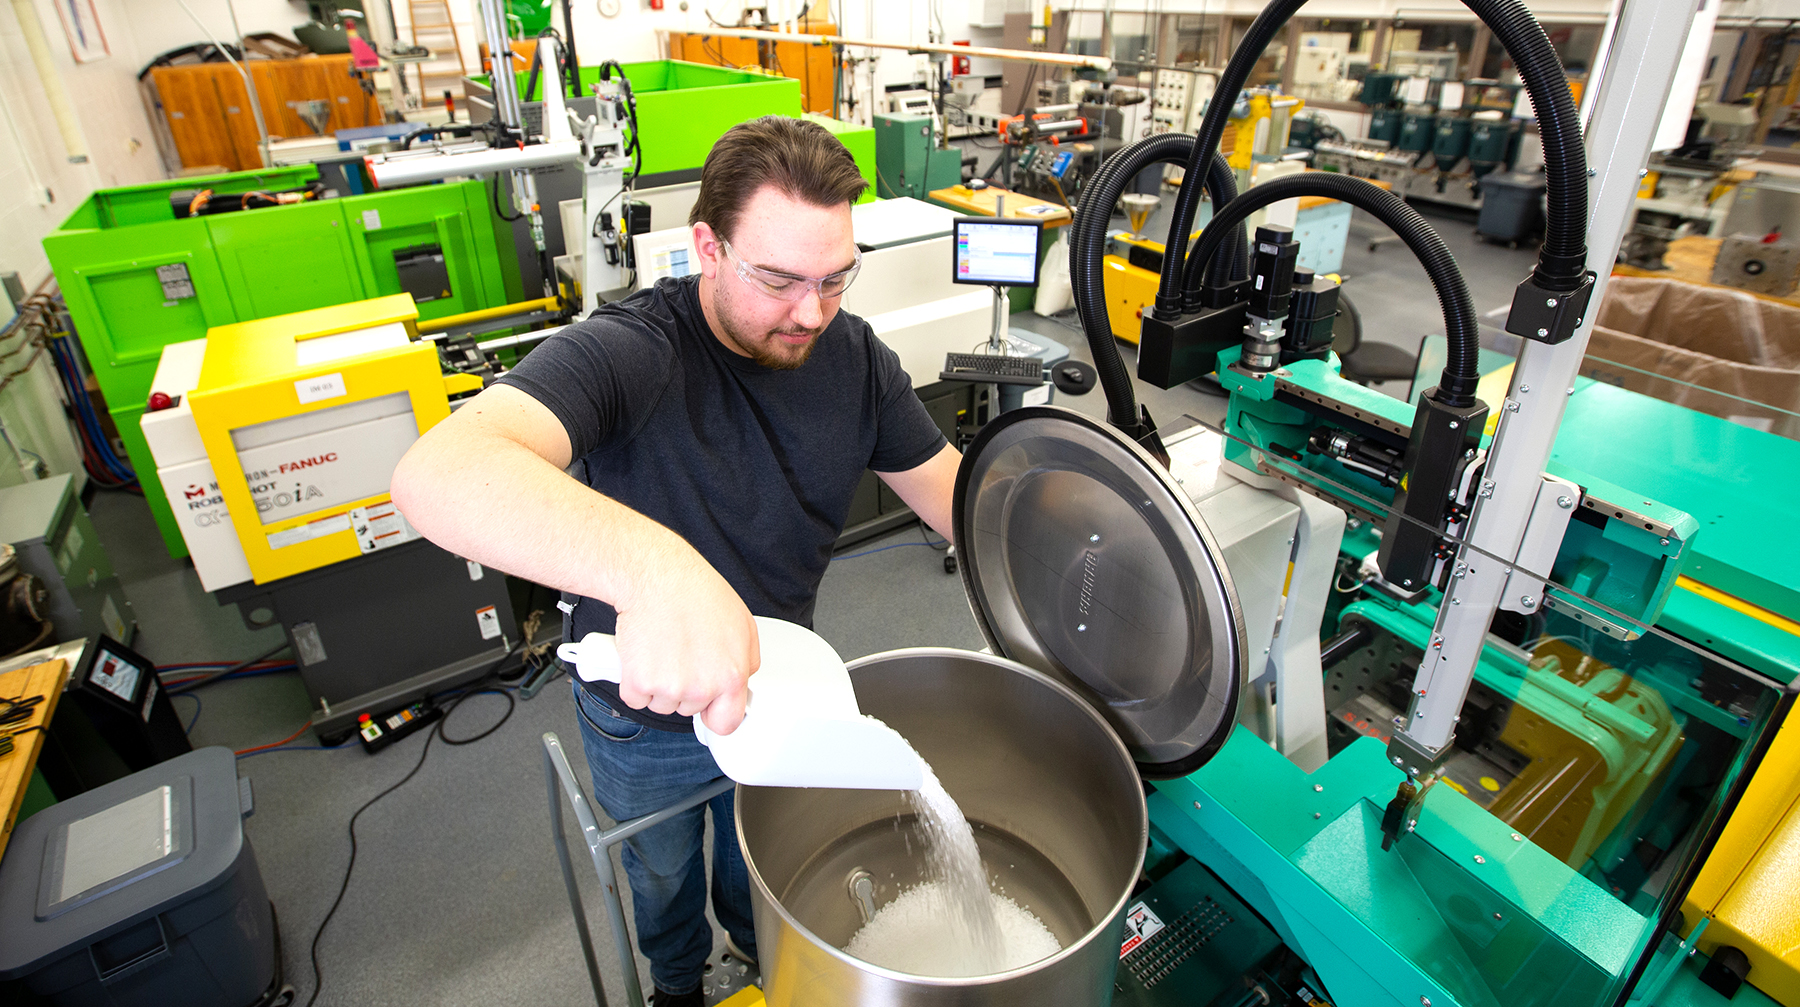 UW-Stout student engages with injection molding machine.